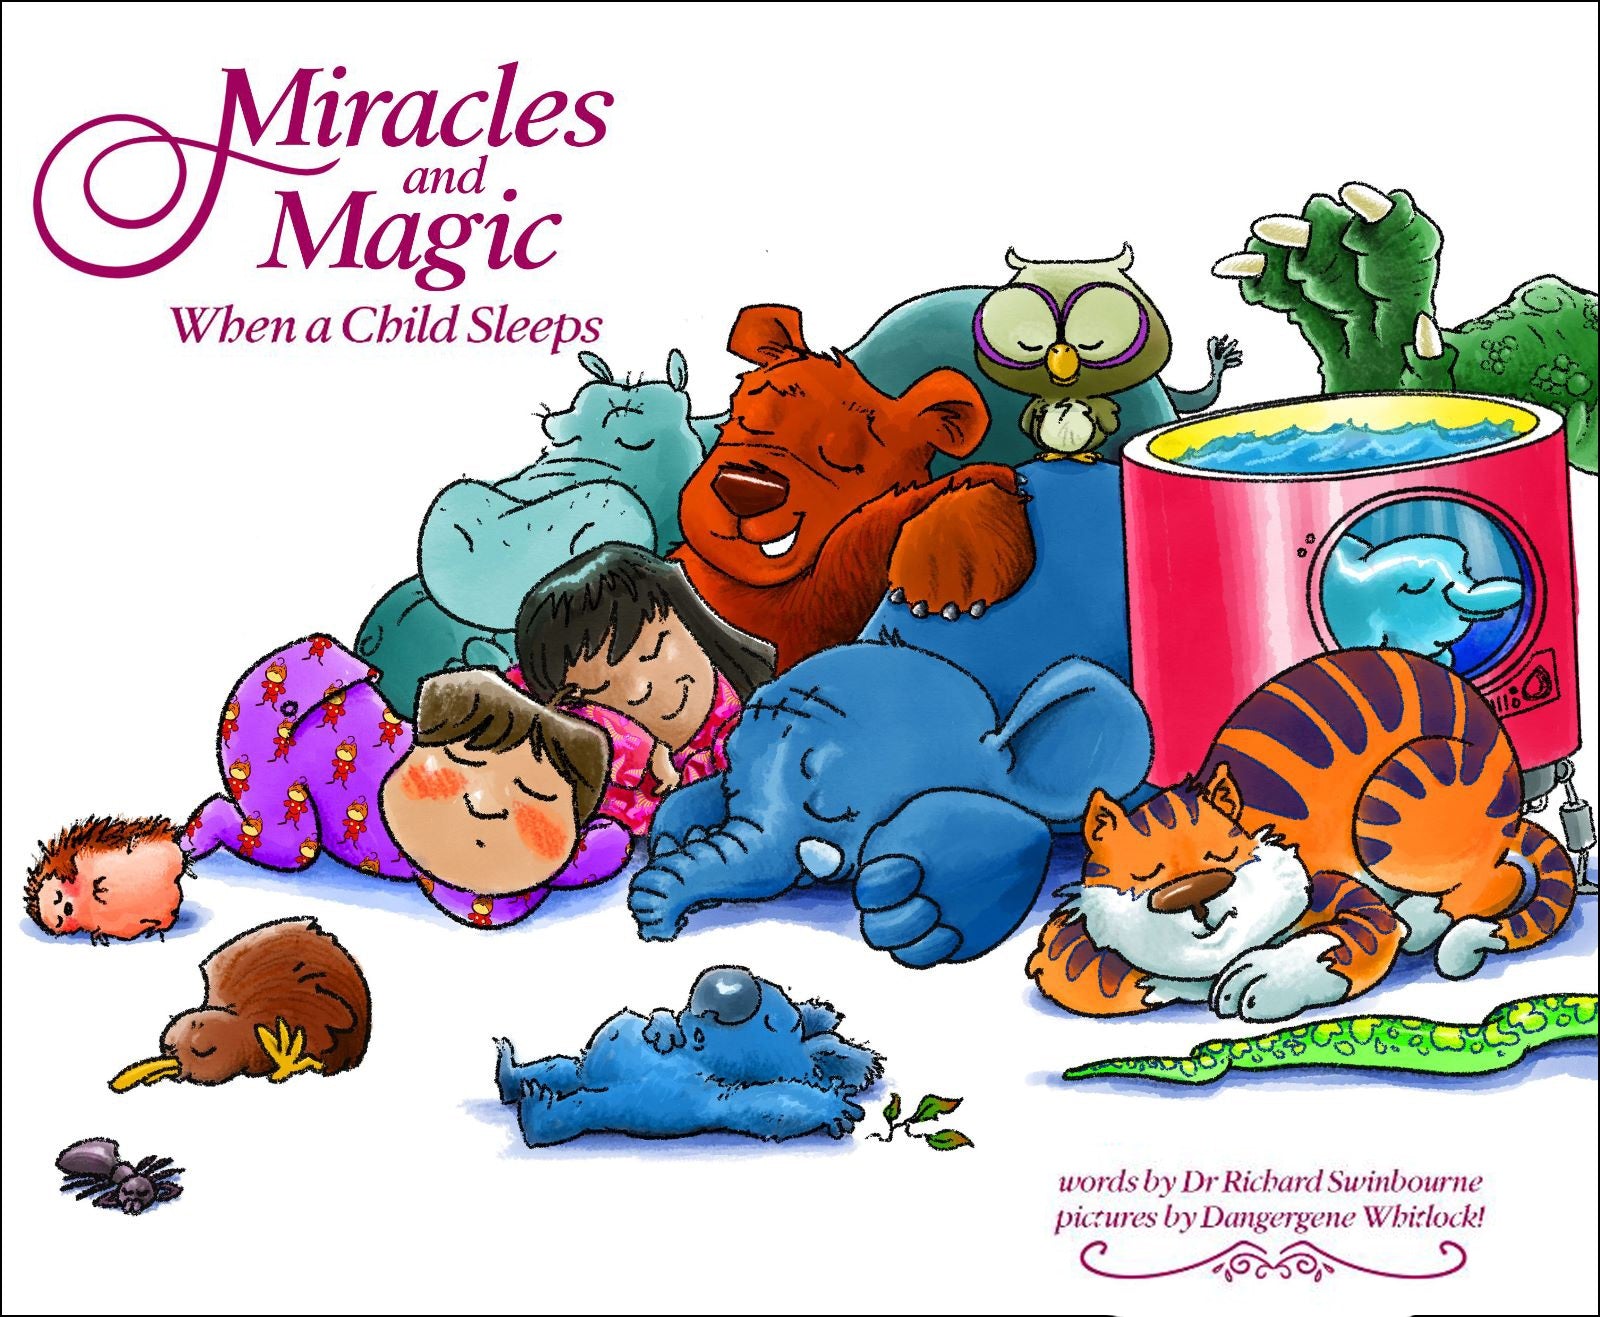 Miracles and Magic: When a Child Sleeps